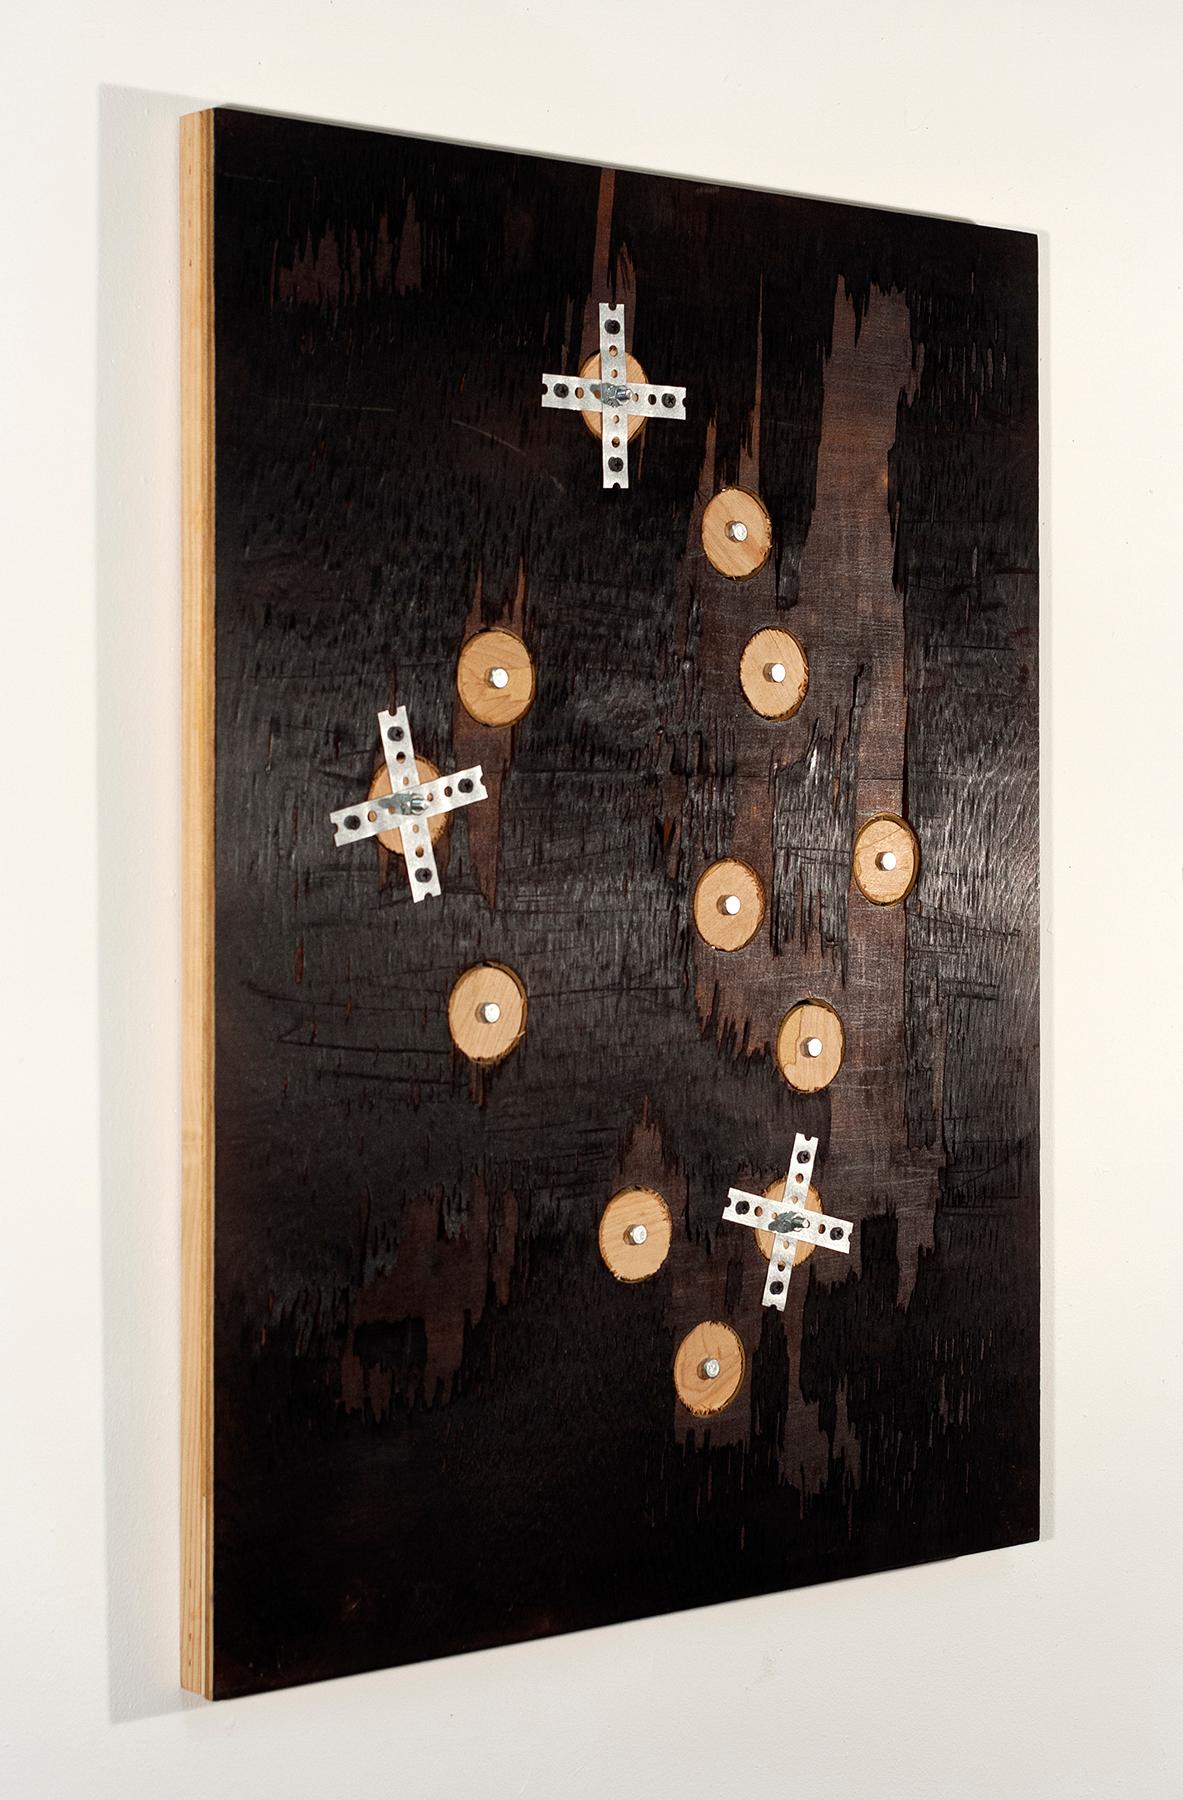 Pyre XII, stainless steel pieces and charred birch plywood created with fire - Abstract Painting by Michael Watson